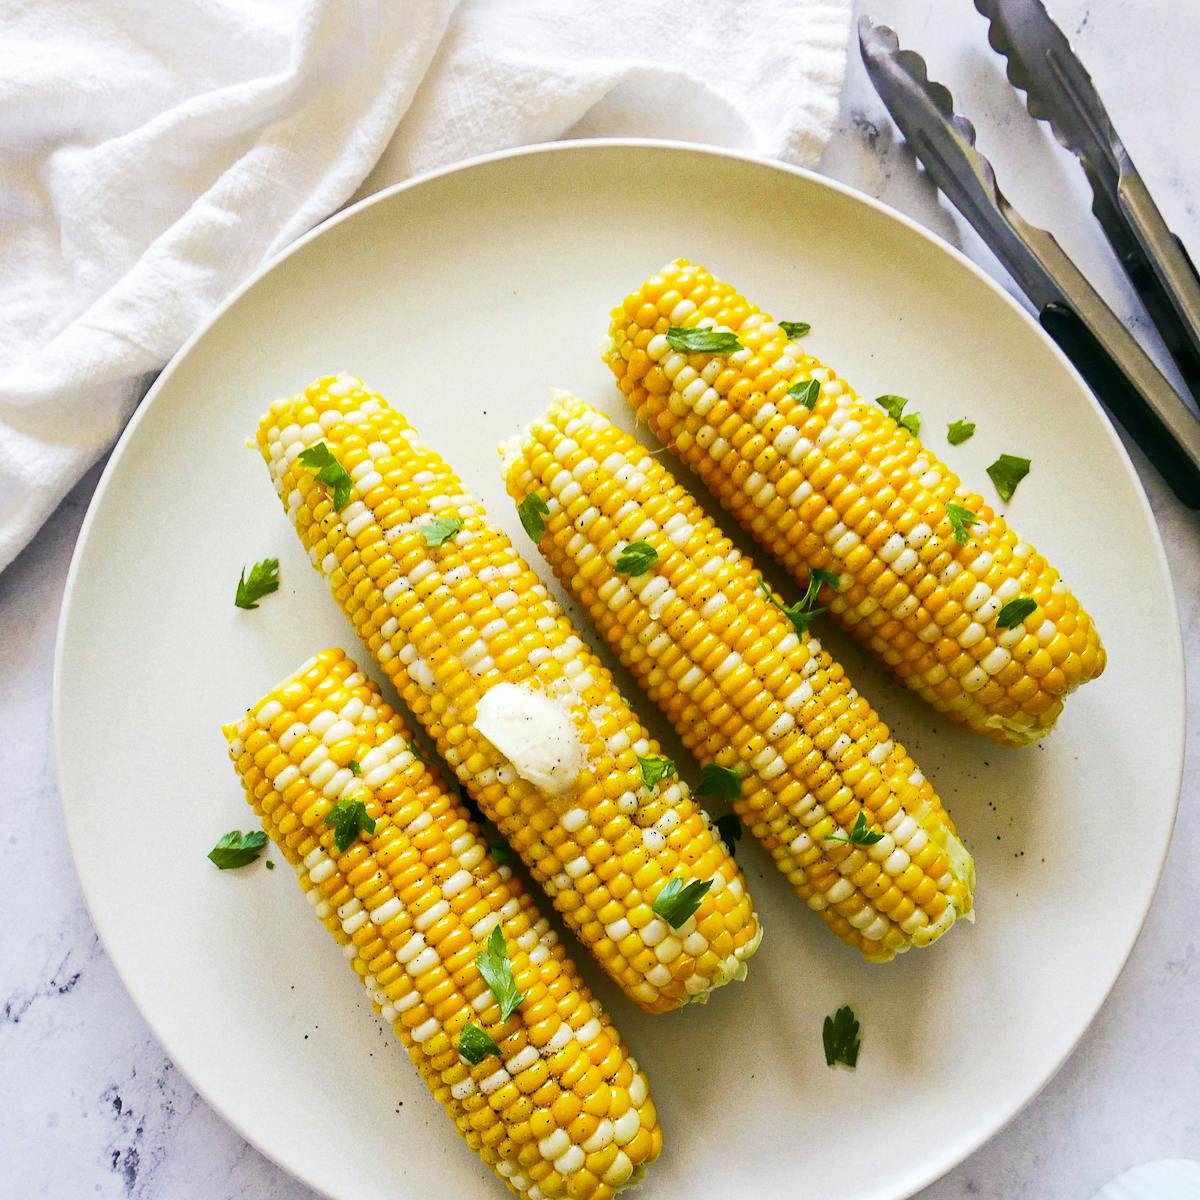 Four ears of corn on the cob on a large white platter.